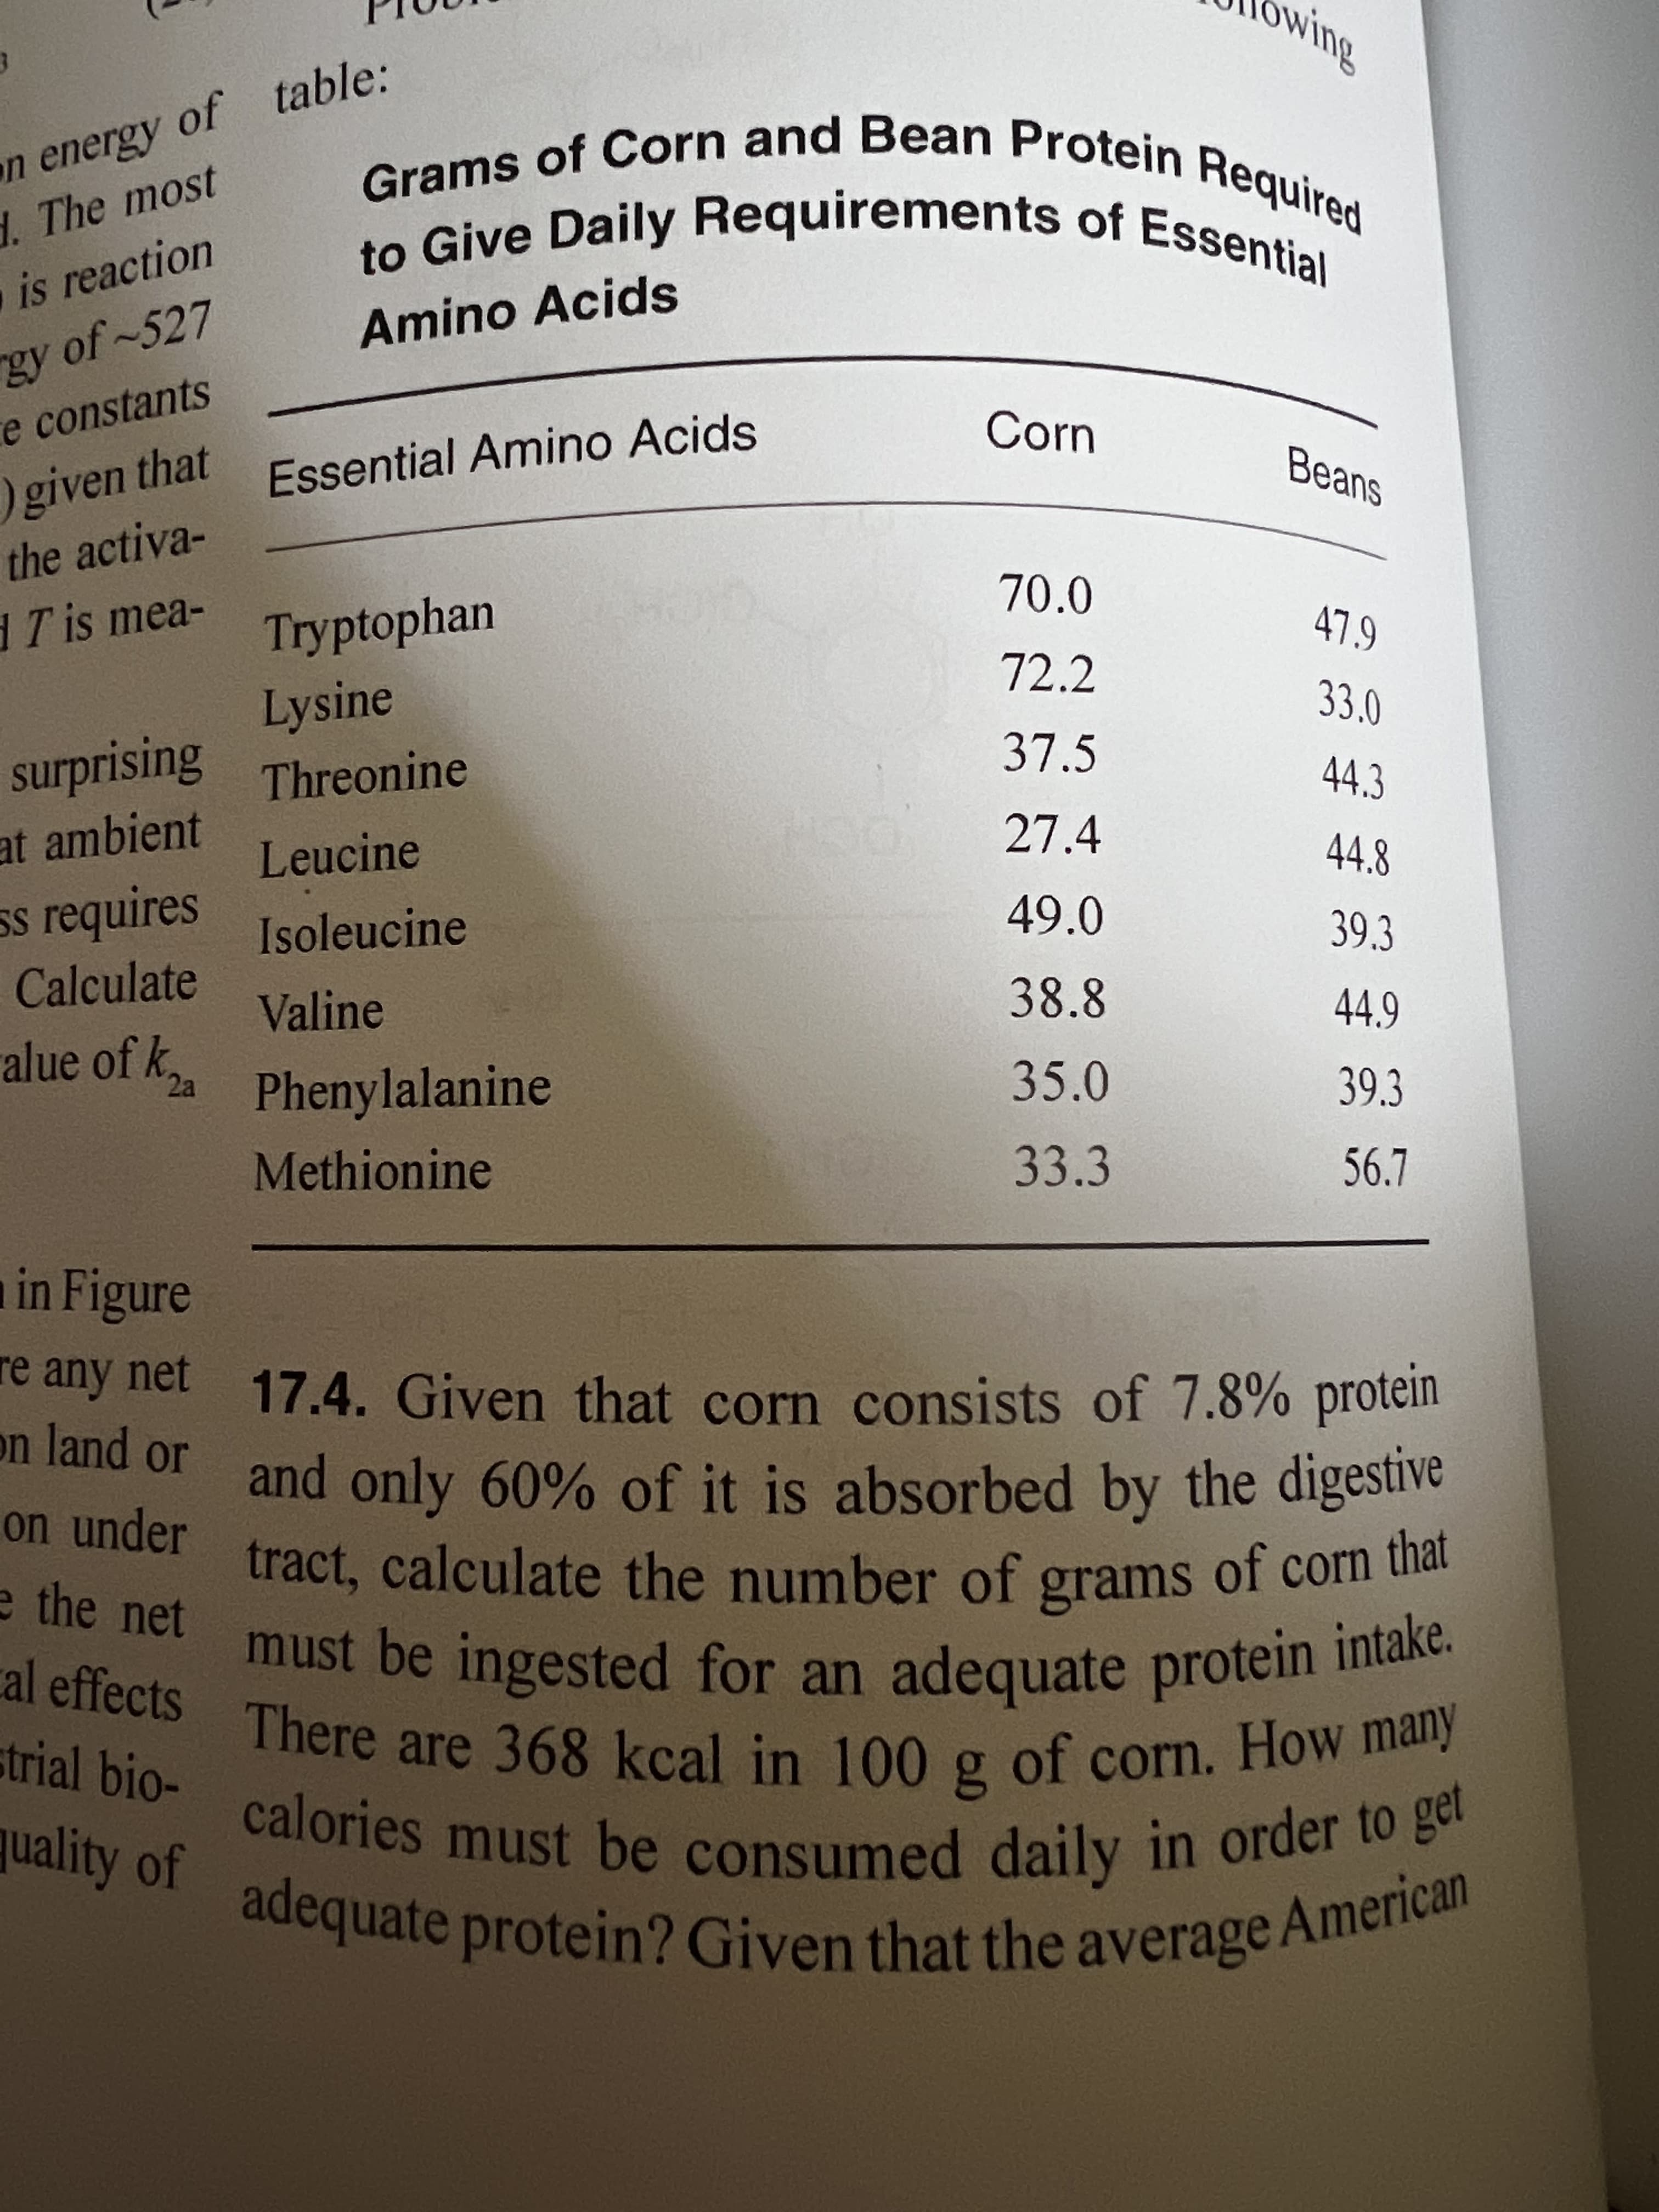 n energy of table:
1. The most
Give Daily Requirements of Essenti
is reaction
Amino Acids
gy of~527
e constants
Corn
given that
the activa-
Essential Amino Acids
Beans
AT is mea-
Tryptophan
70.0
72.2
Lysine
33.0
surprising
Threonine
37.5
44.3
at ambient
Leucine
27.4
44.8
ss requires
Calculate
Isoleucine
49.0
39.3
Valine
38.8
44.9
alue of k.
2a
Phenylalanine
35.0
39.3
Methionine
33.3
56.7
in Figure
e any net 17.4. Given that corn consists of 7.8% protein
on land or and only 60% of it is absorbed by the digestive
on under
tract, calculate the number of grams of corn uiat
must be ingested for an adequate protein intake
e the net
cal effects There are 368 kcal in 100
strial bio-
of corn. How many
calories
juality of
must be consumed daily in order to ger
ddcquate protein? Given that the average Americe
